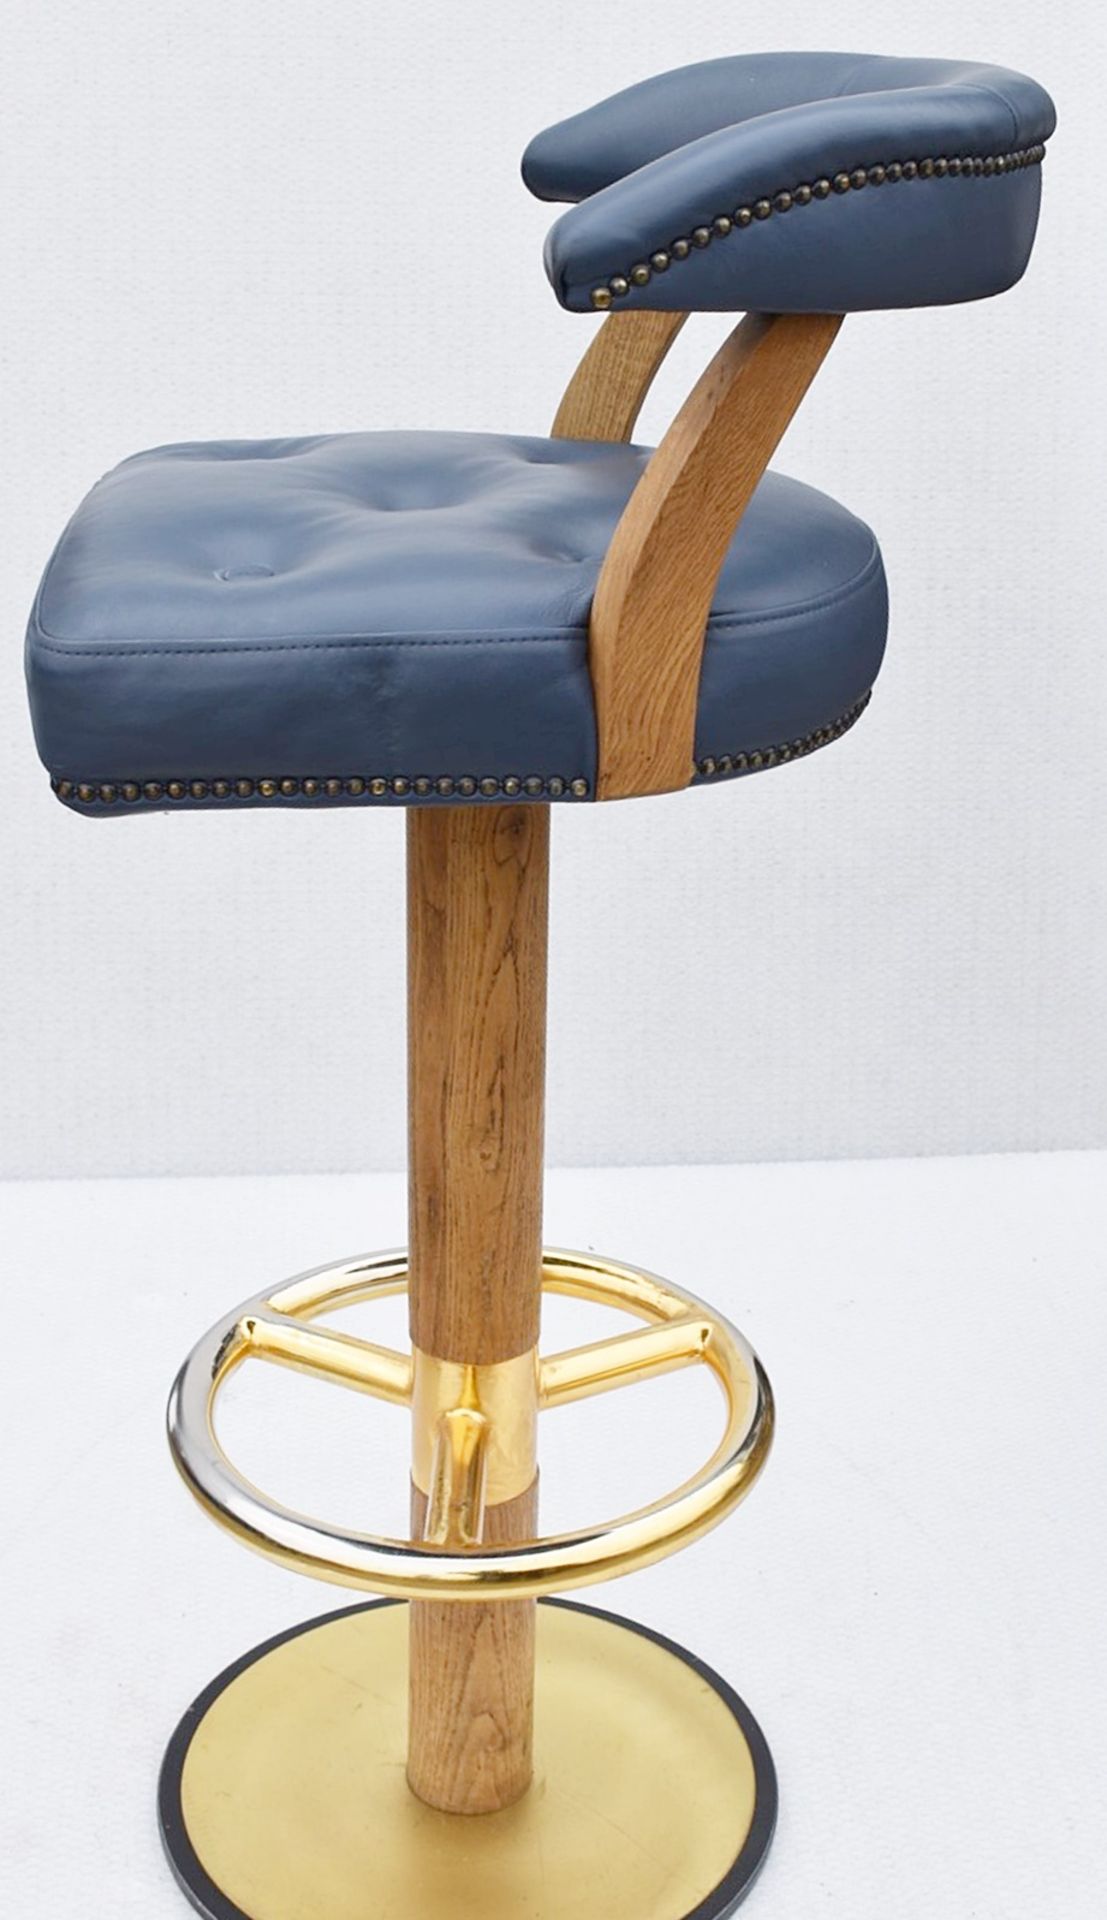 1 x Luxury Buttoned Bar Stool with Wooden Frame, Metal Base, Footrest and Studded Upholstery in a - Image 2 of 6